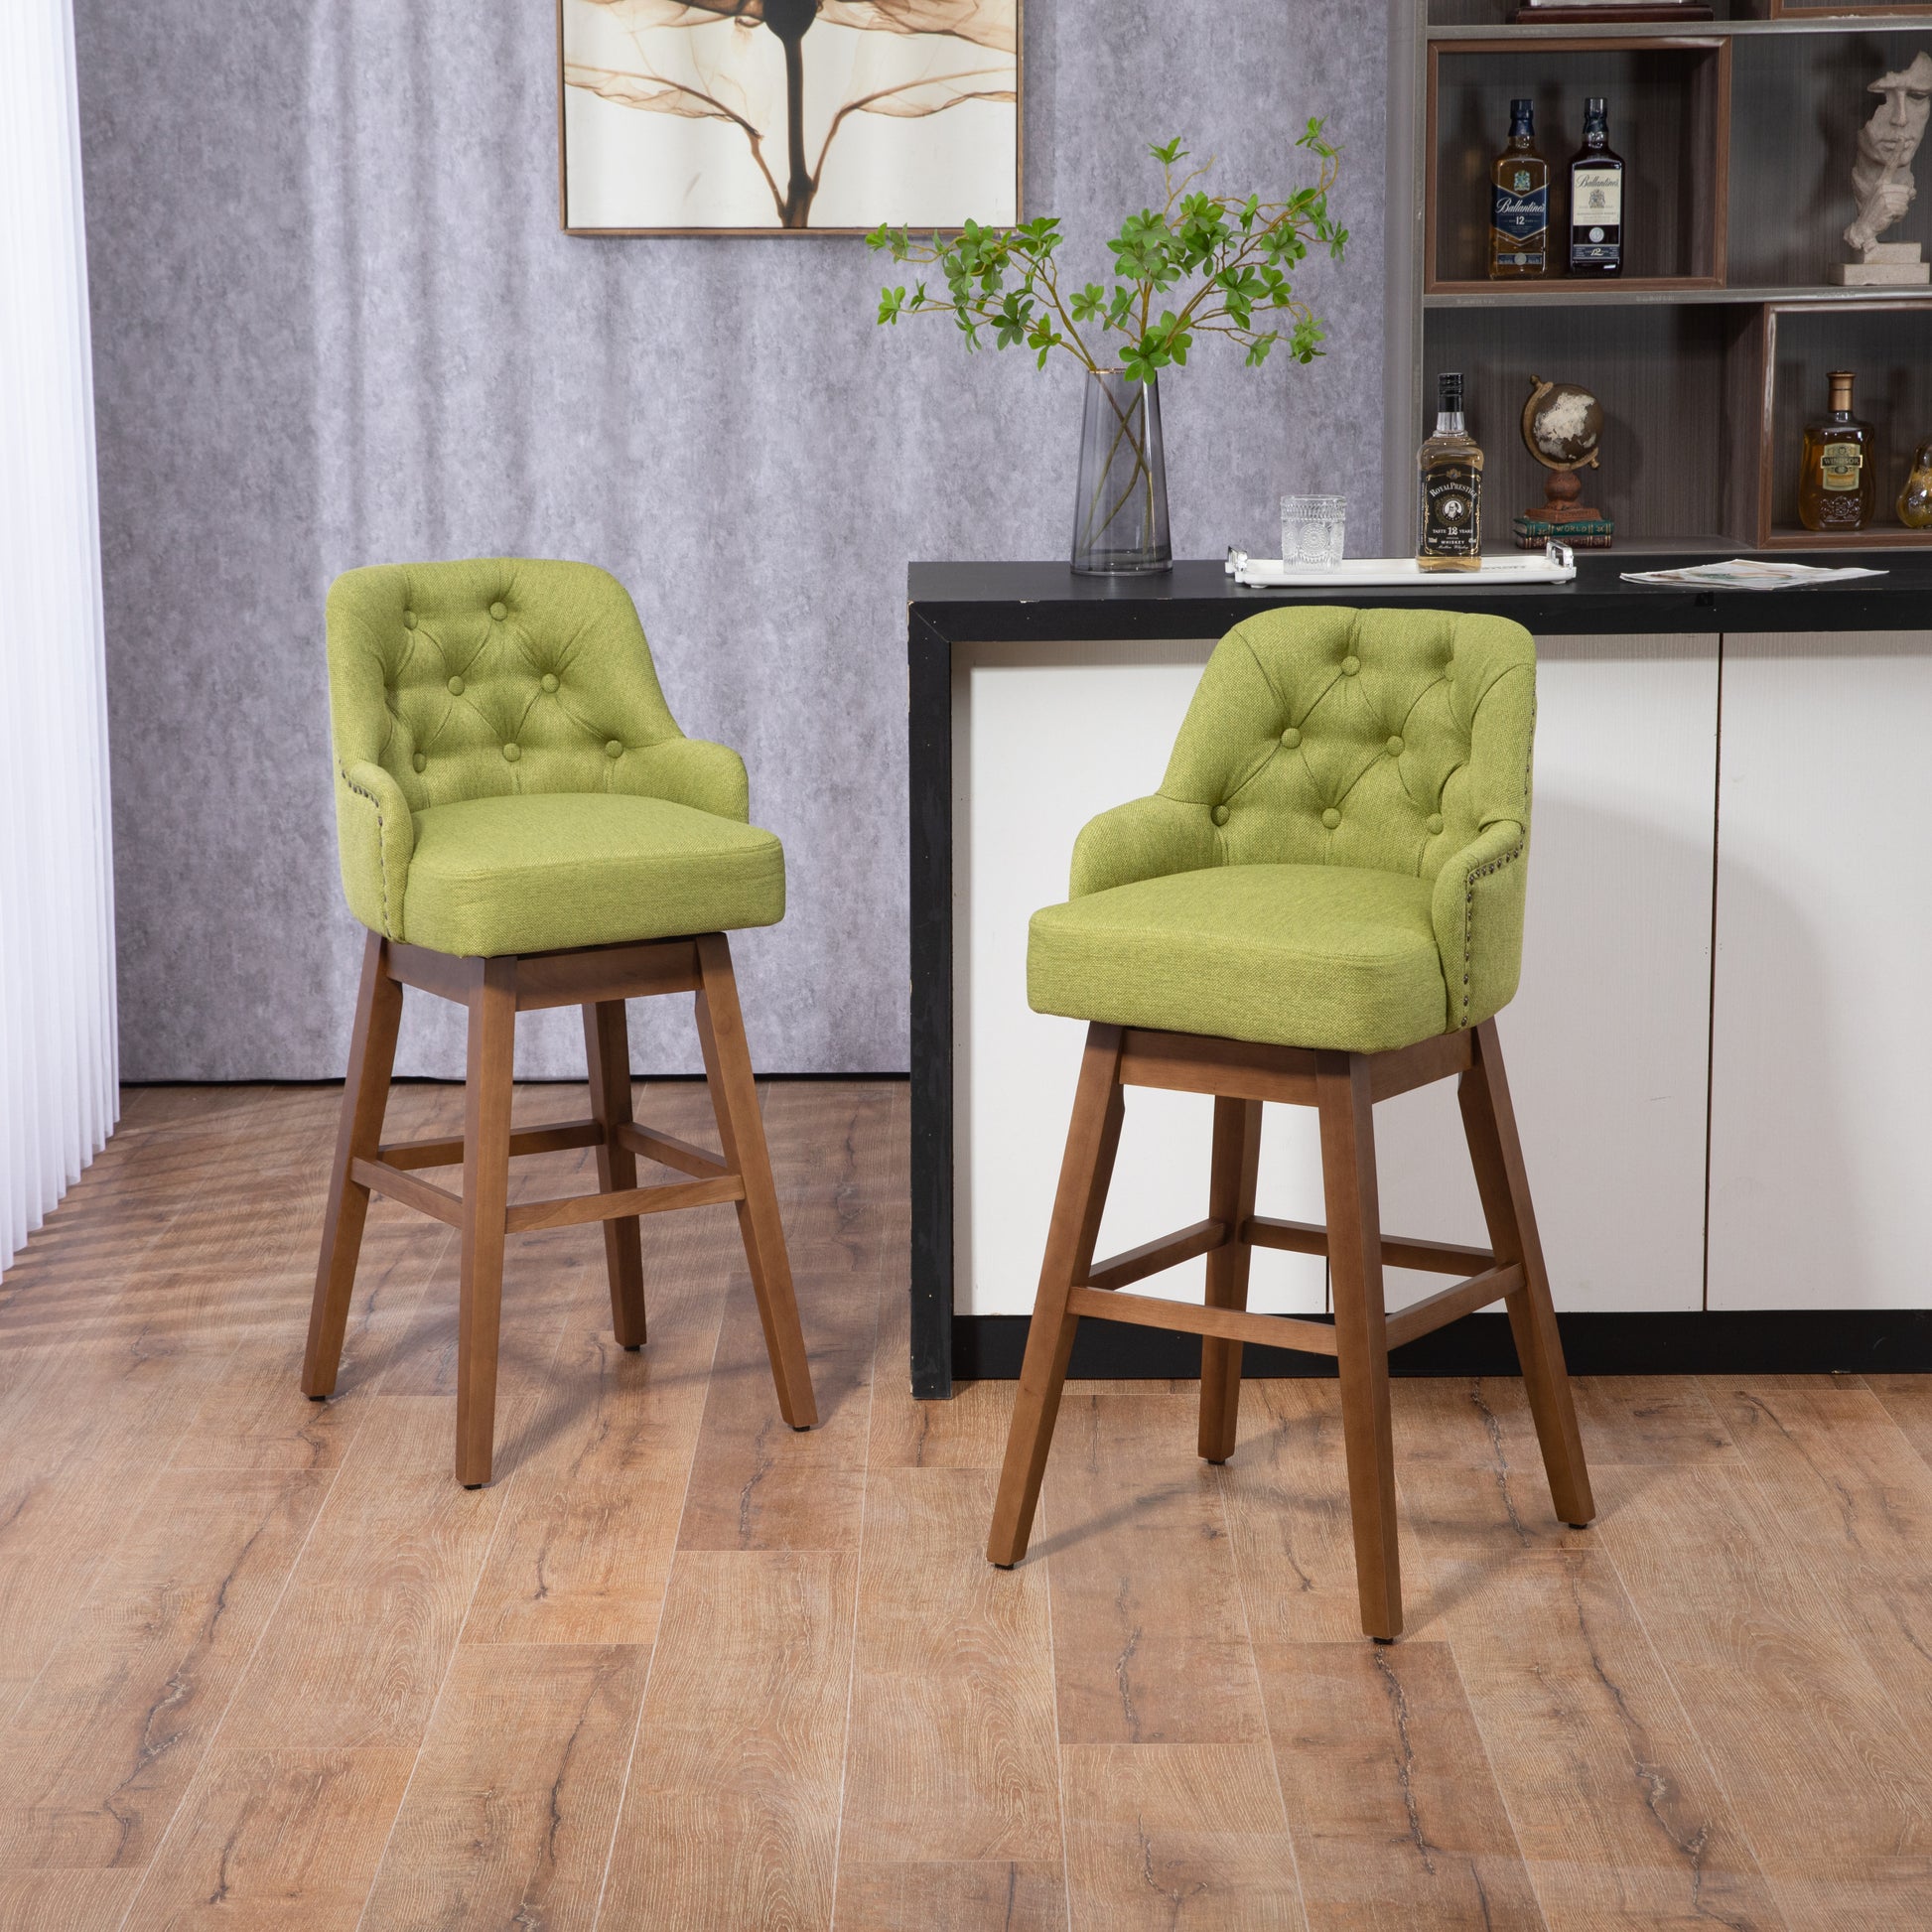 Coolmore Bar Stools Set Of 2 Counter Height